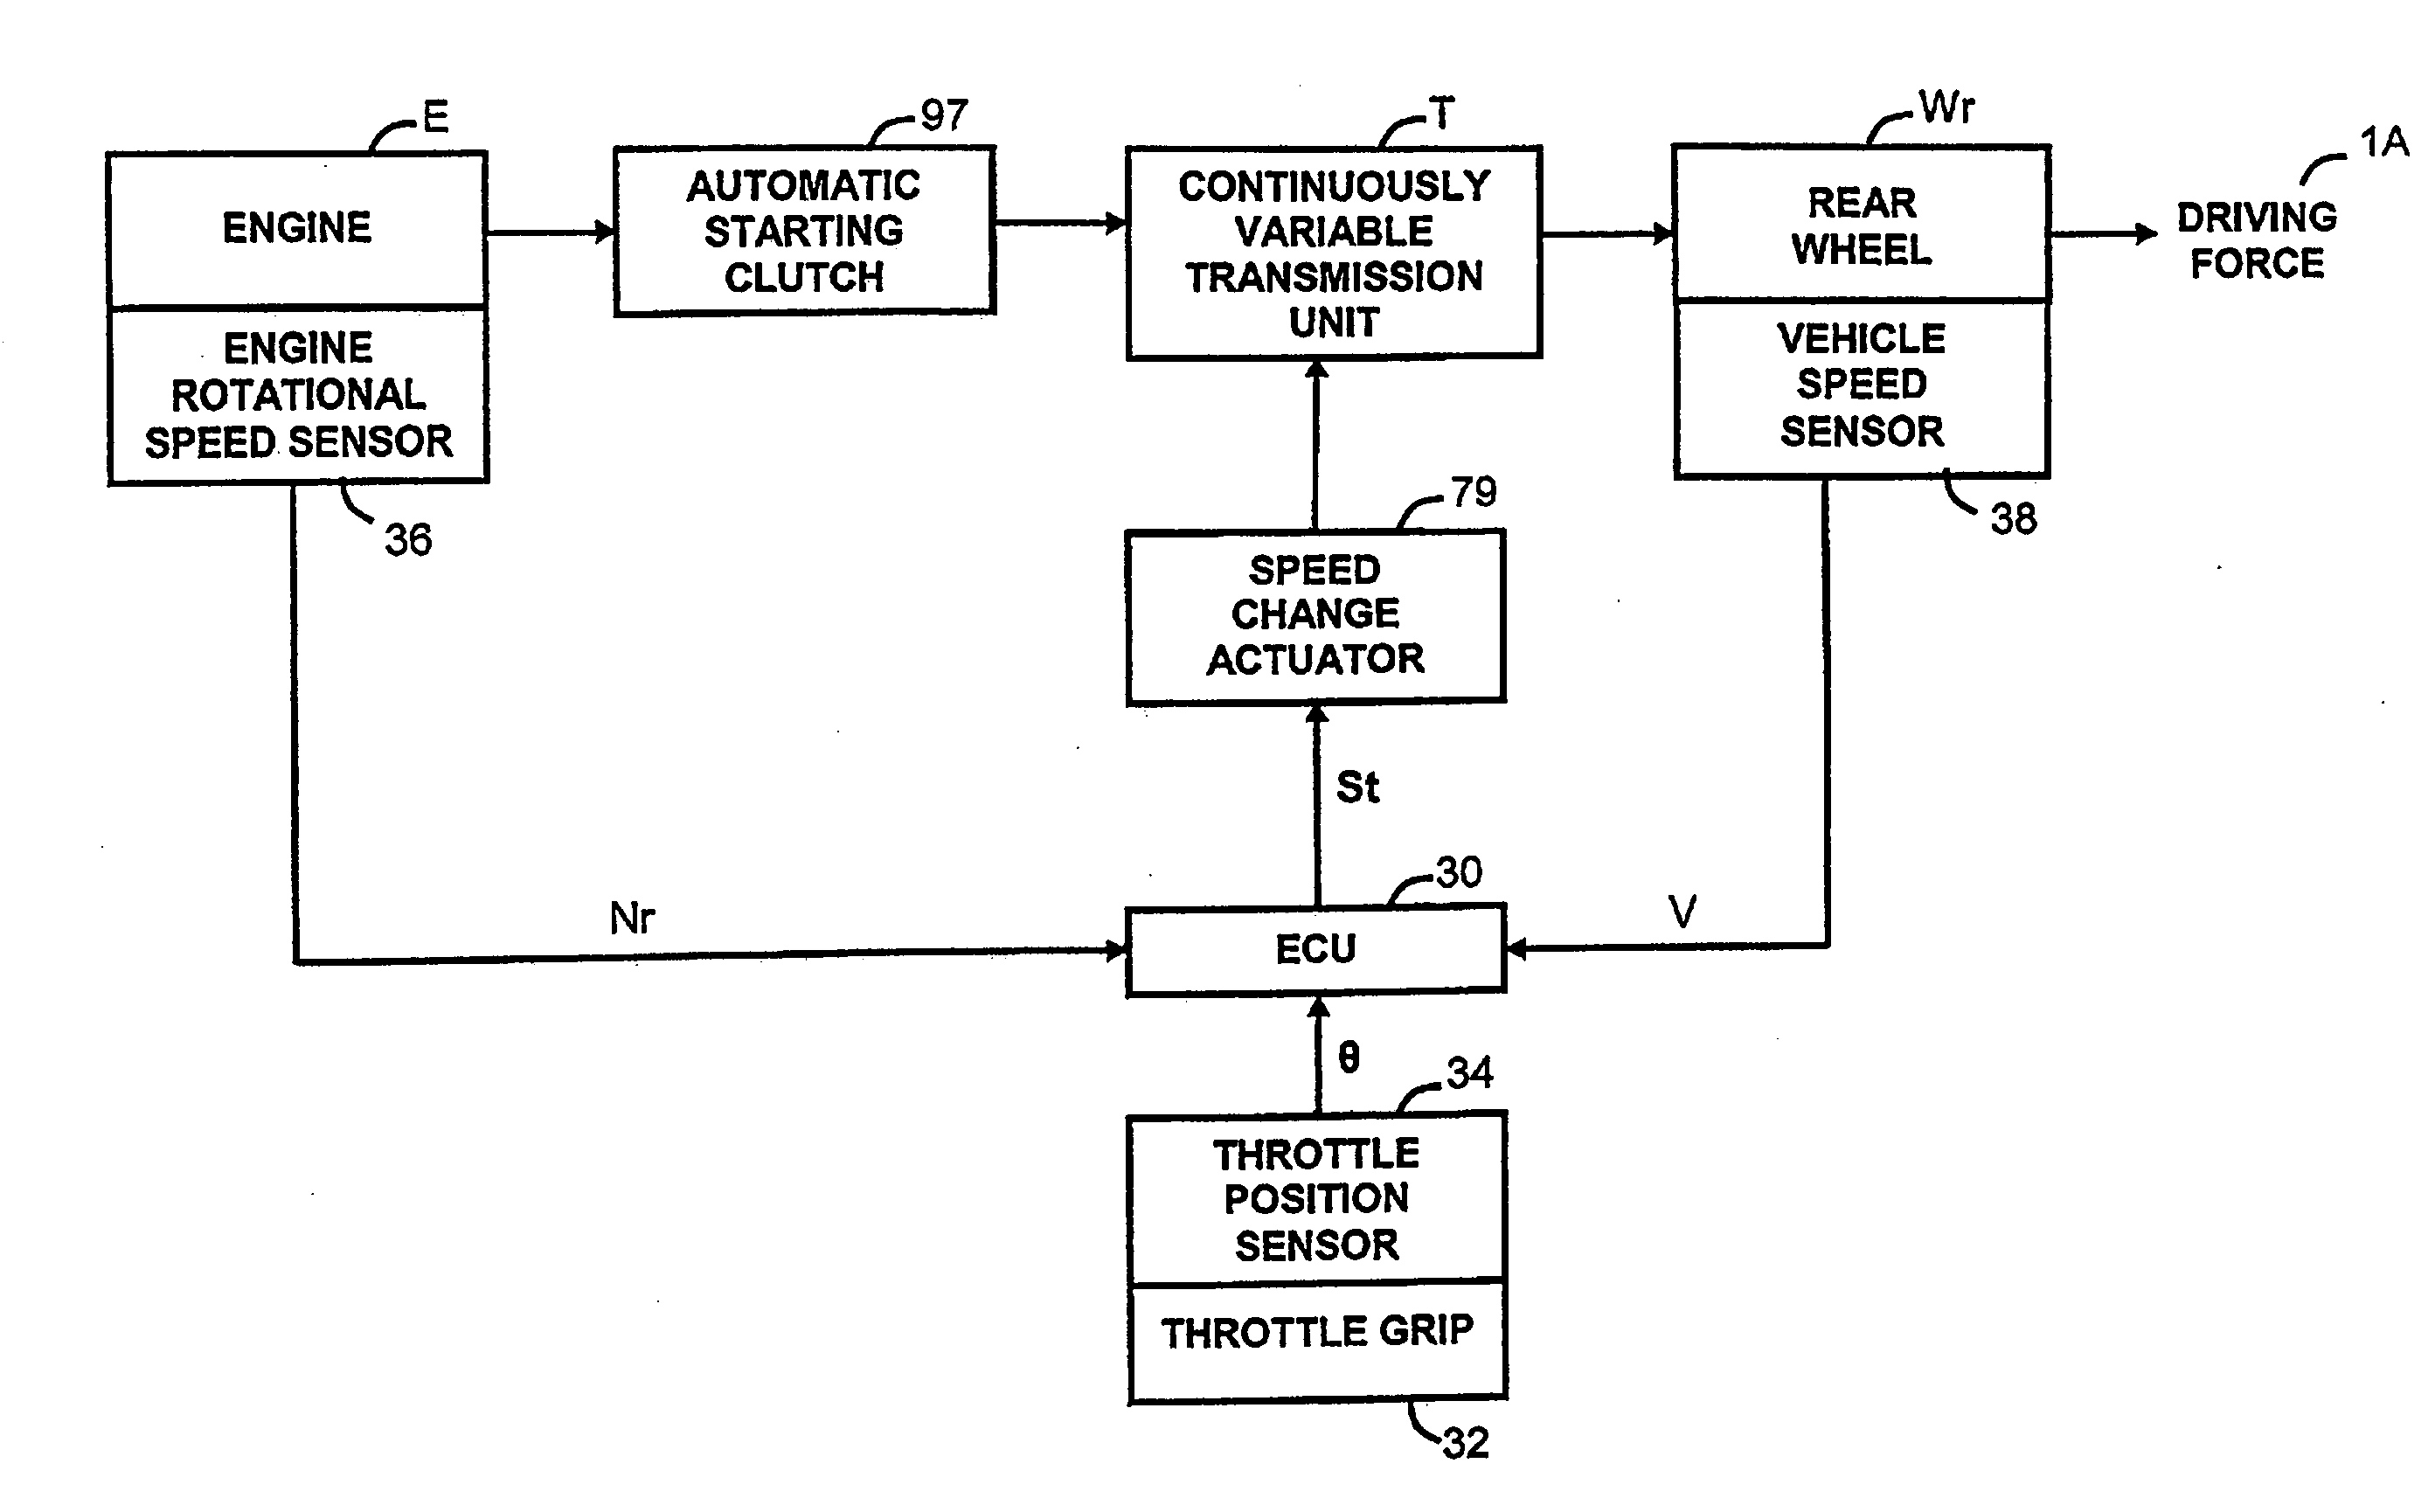 Gear ratio control method for continuously variable transmission of a vehicle